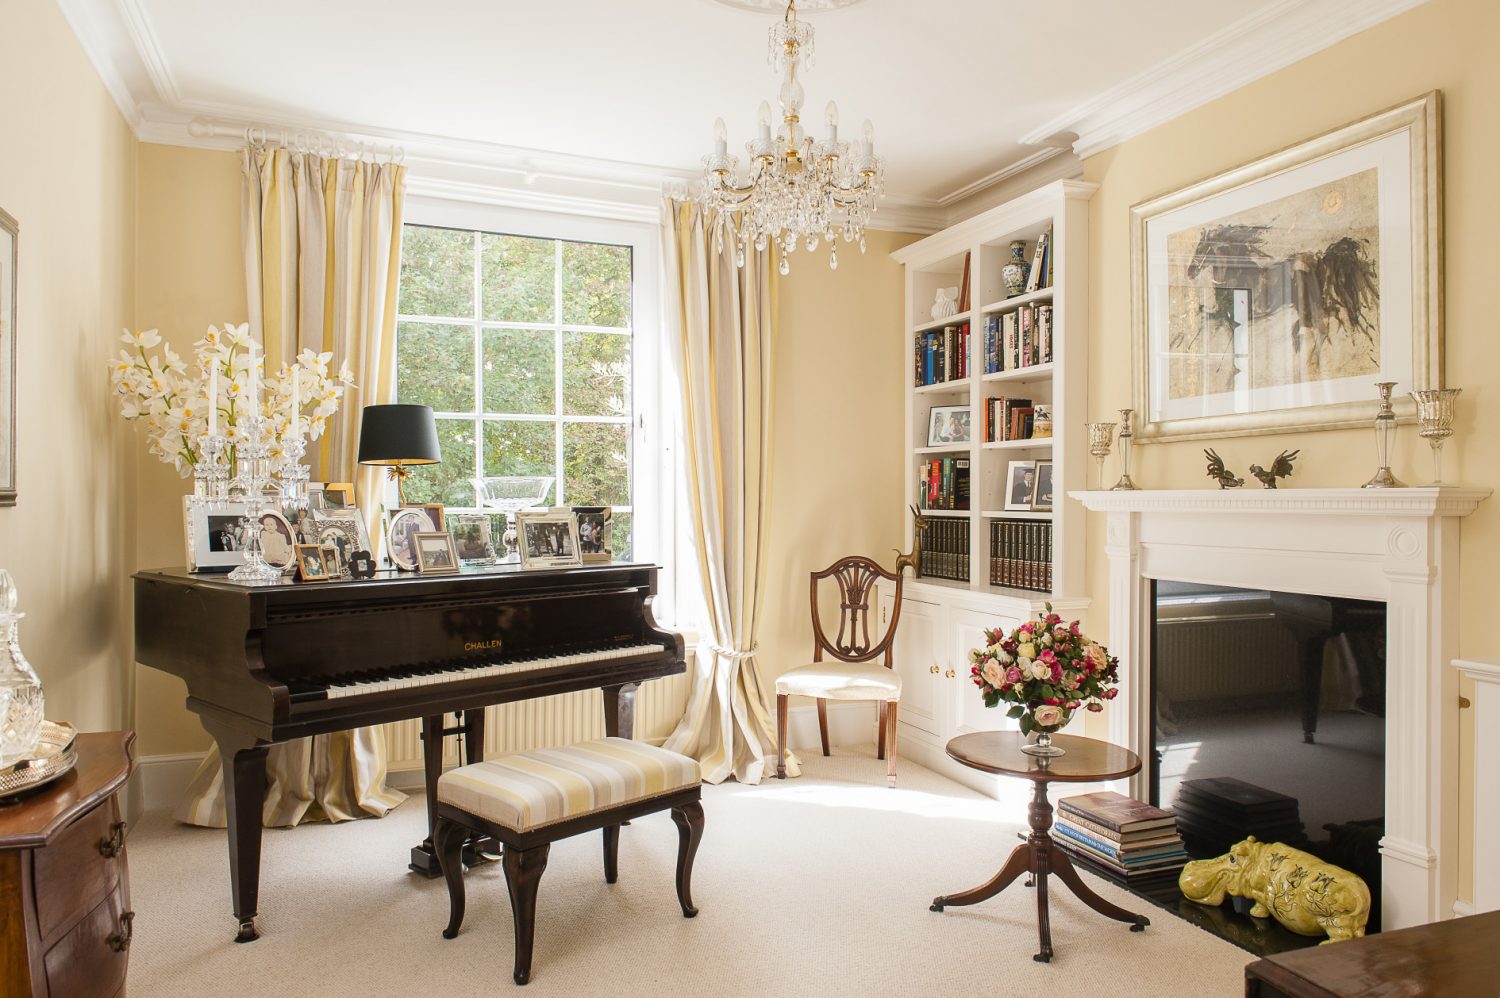 The music room walls are painted in Farrow & Ball’s Cream. Pride of place is given to the ebony Challen baby grand piano that belonged to Murielle’s mother.